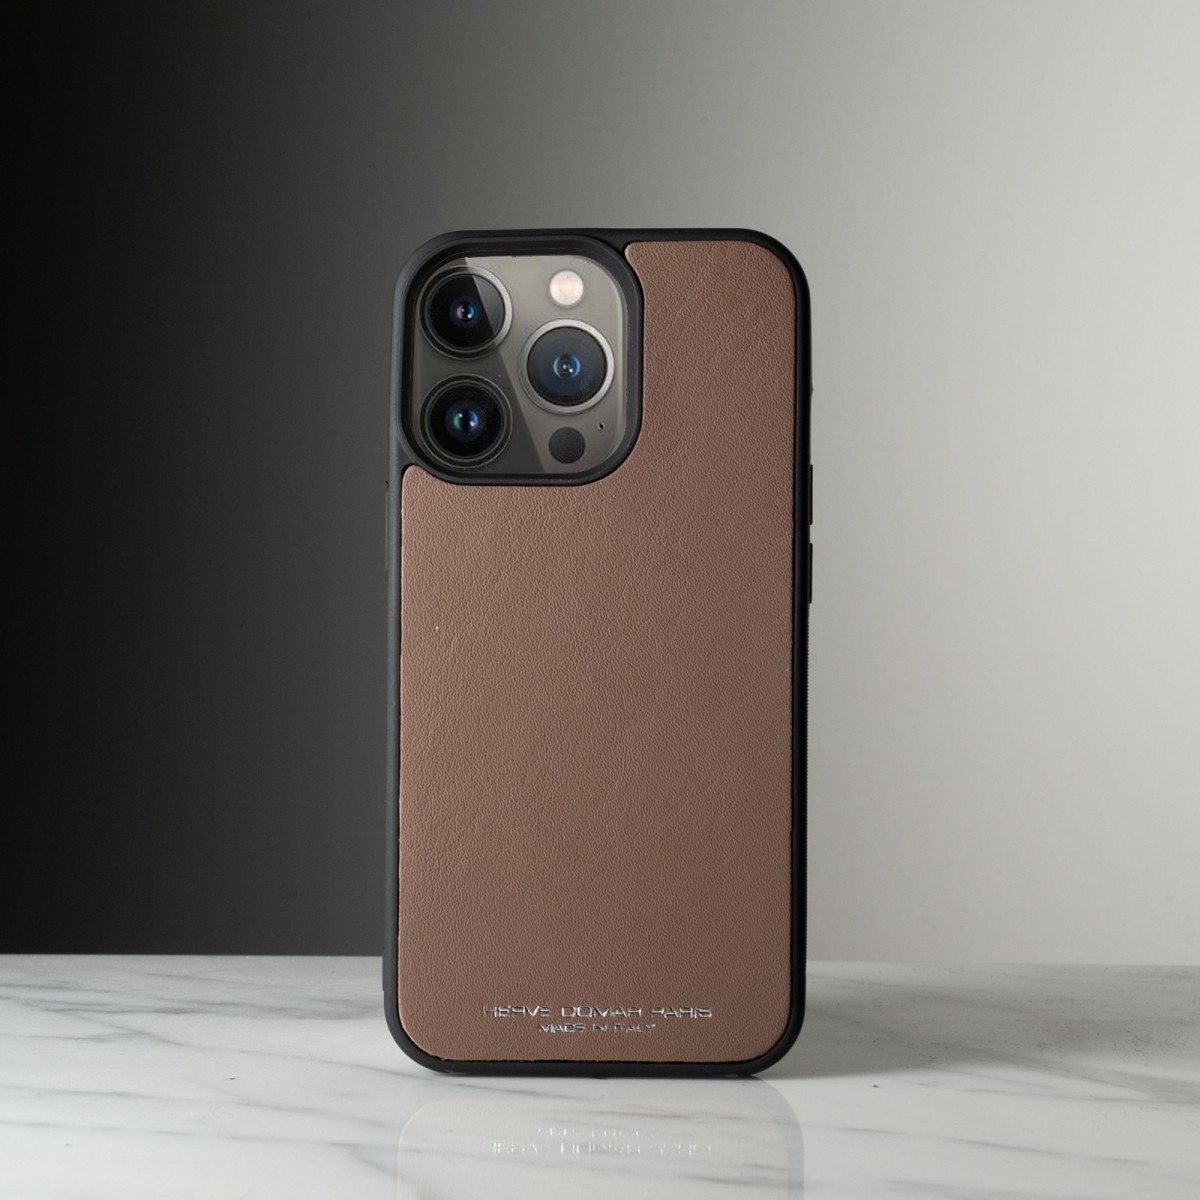 IPHONE 13 PRO CASE - Handcrafted leather iPhone case made in Italy